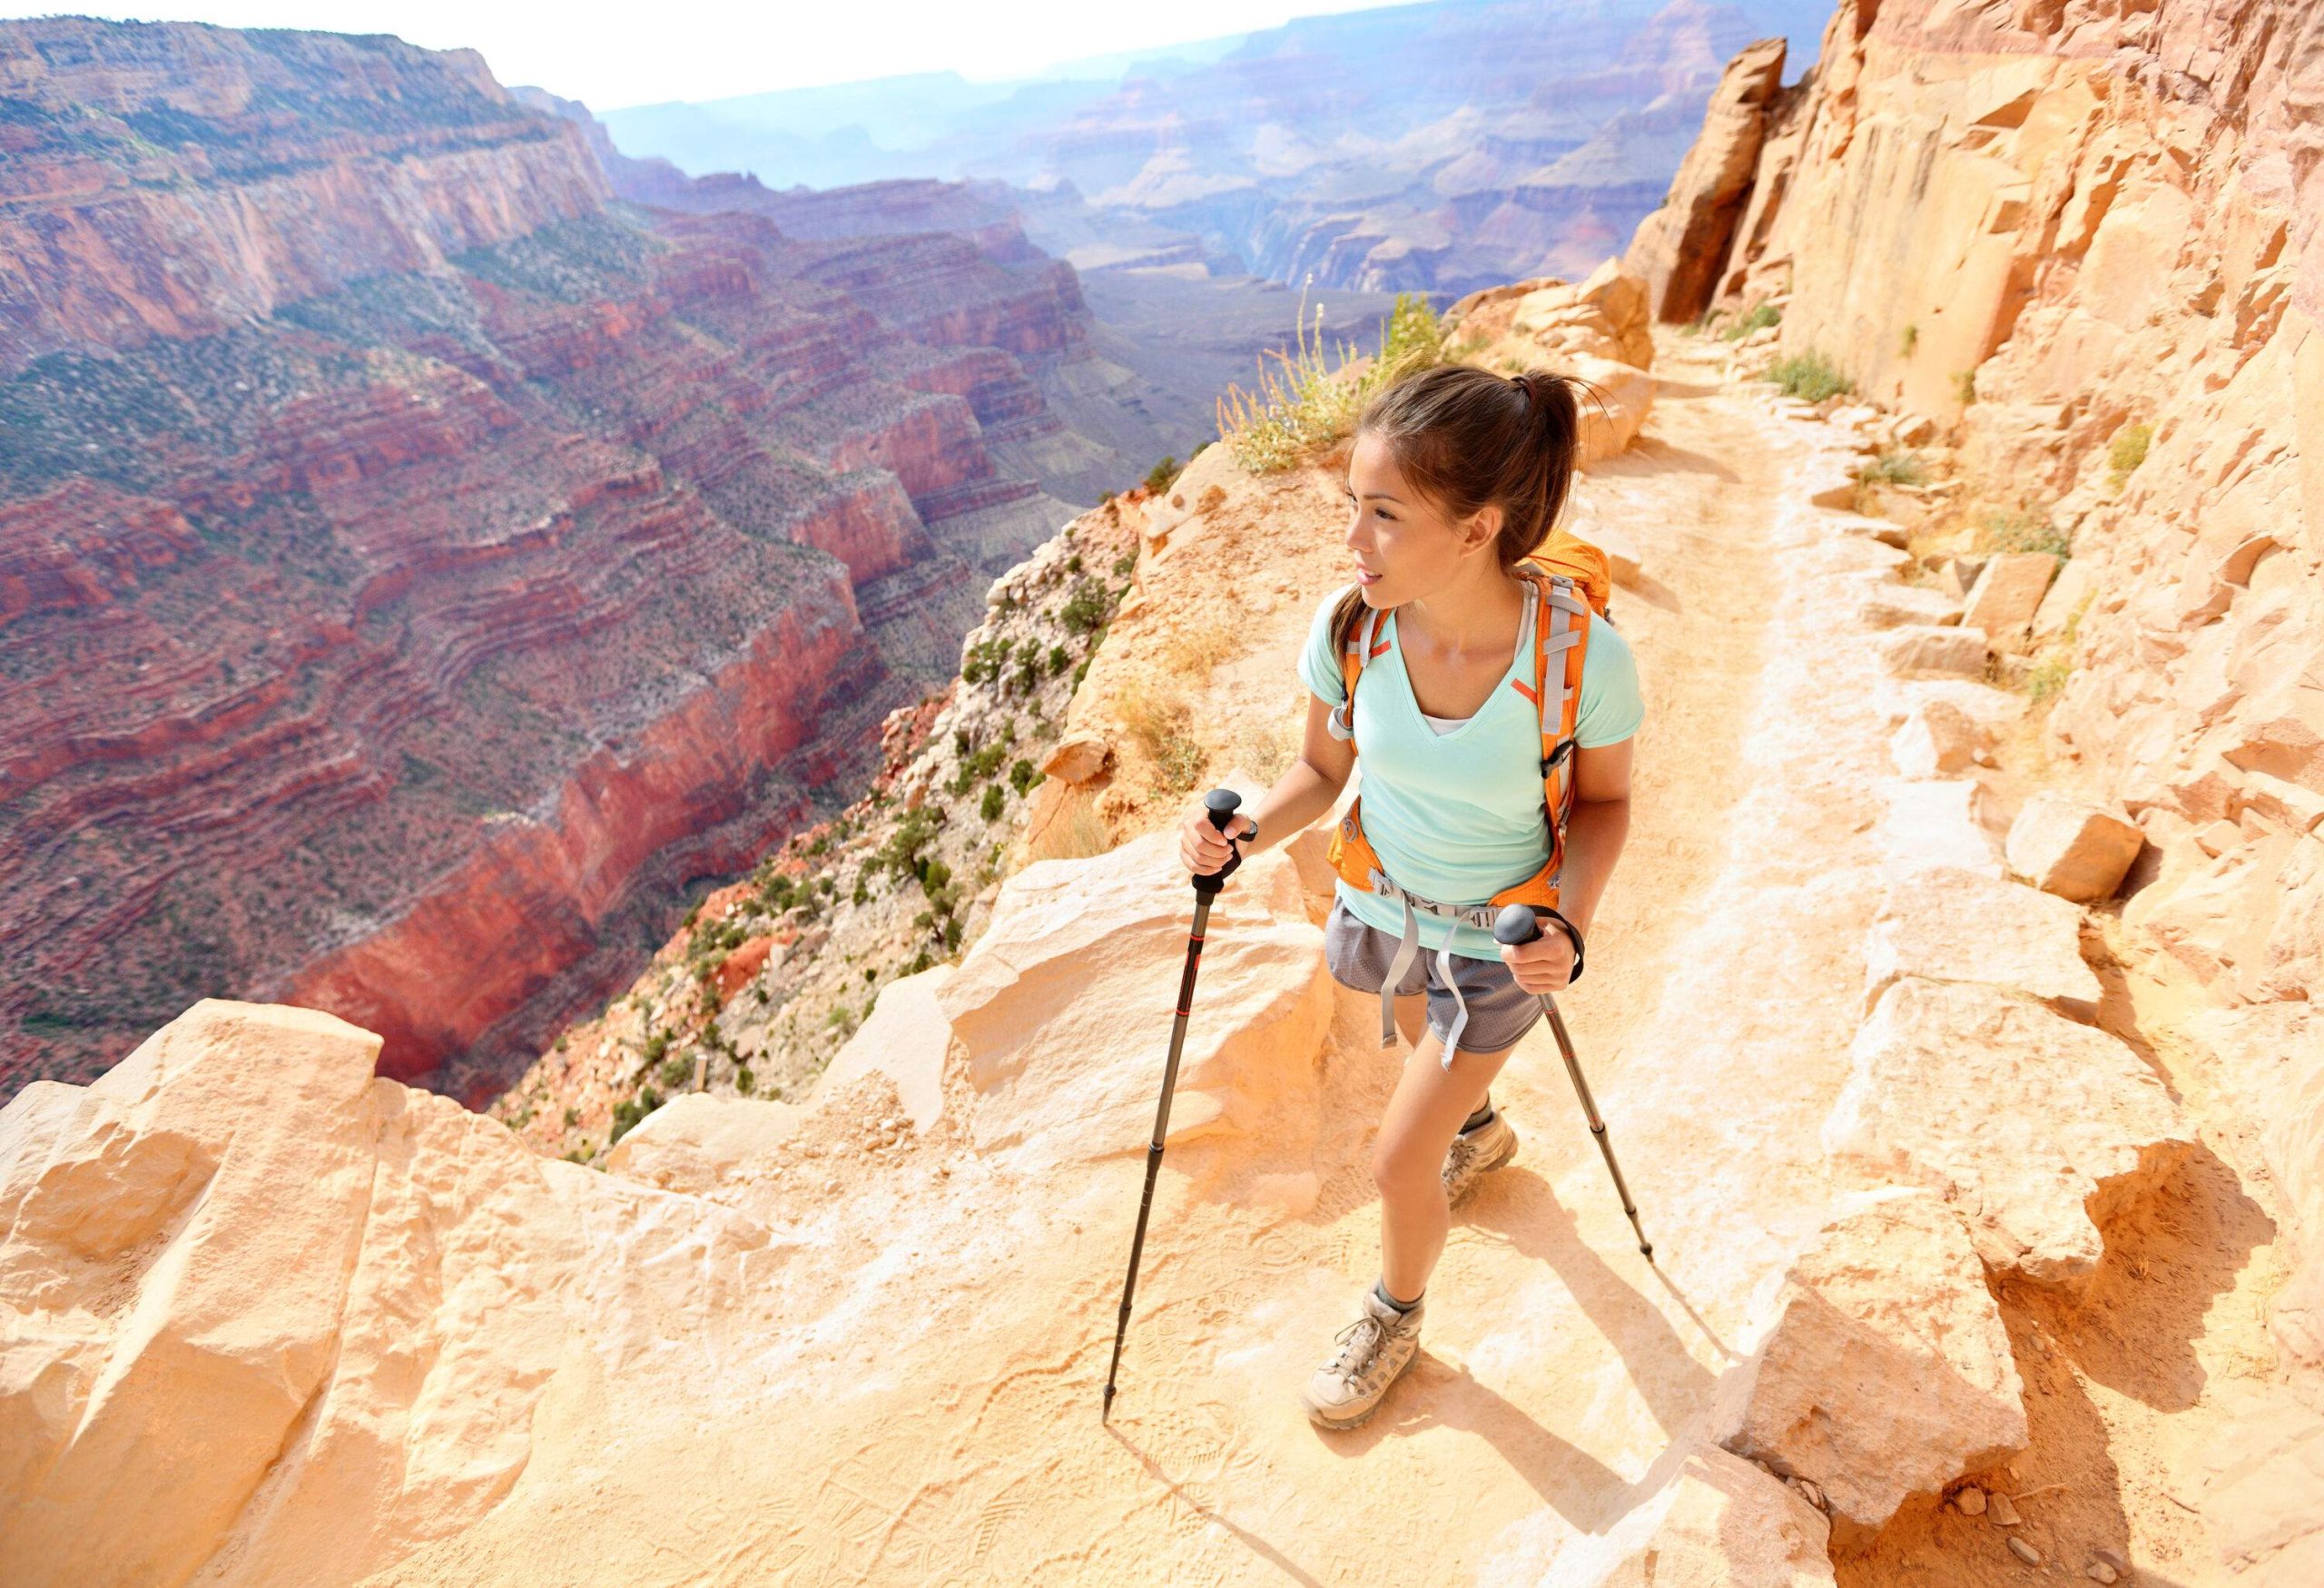 A woman clutching trekking poles walking on a narrow path carved into the rocky mountains of the Grand Canyon, Arizona, USA.